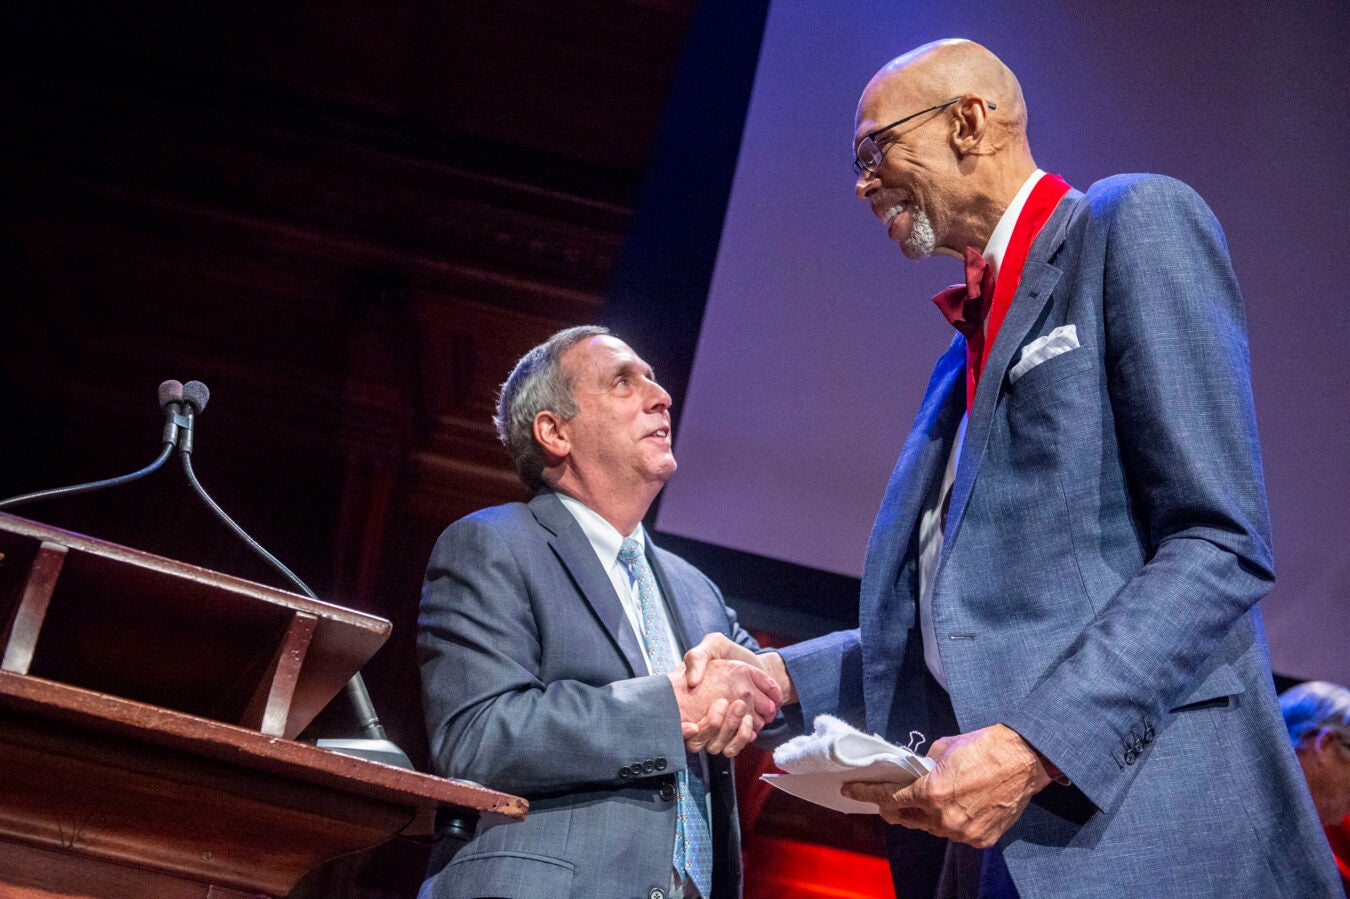 Bacow congratulated basketball Hall of Famer Kareem Abdul-Jabbar as he received one of the seven W.E.B. Du Bois Medals awarded in 2022.